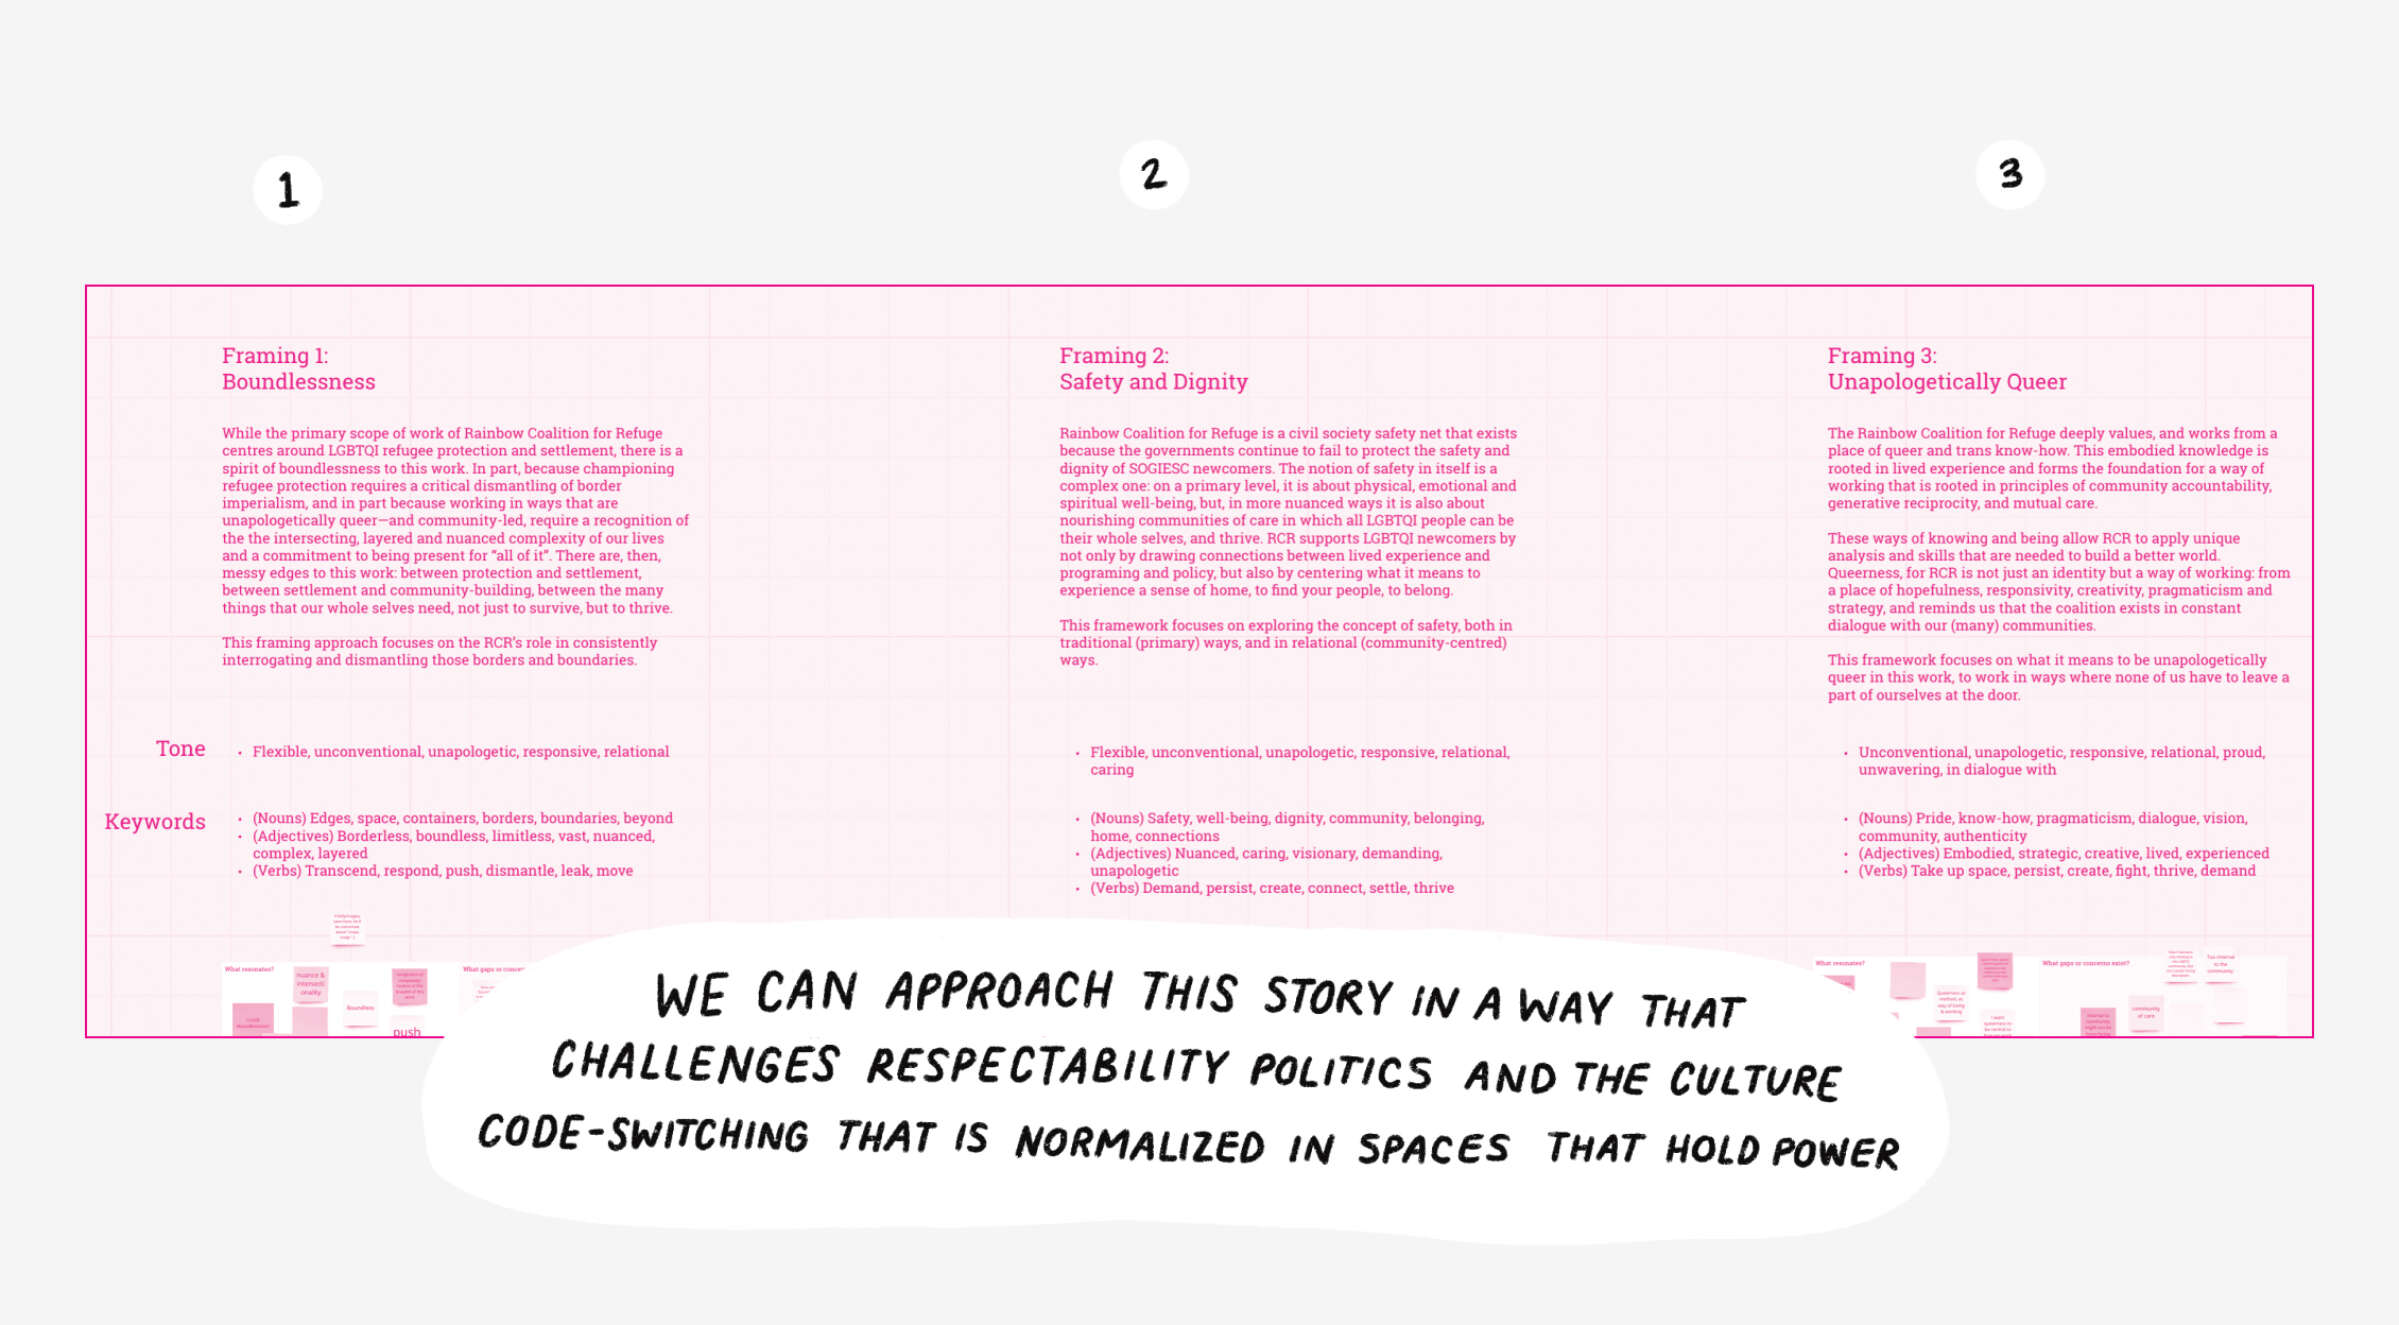 An infographic featuring three sections outlining different strategies for storytelling: "Boundlessness," "Safety and Dignity," and "Unapologetically Queer." Below, text reads: "We can approach this story in a way that challenges respectability politics and the culture code-switching that is normalized in spaces that hold power.